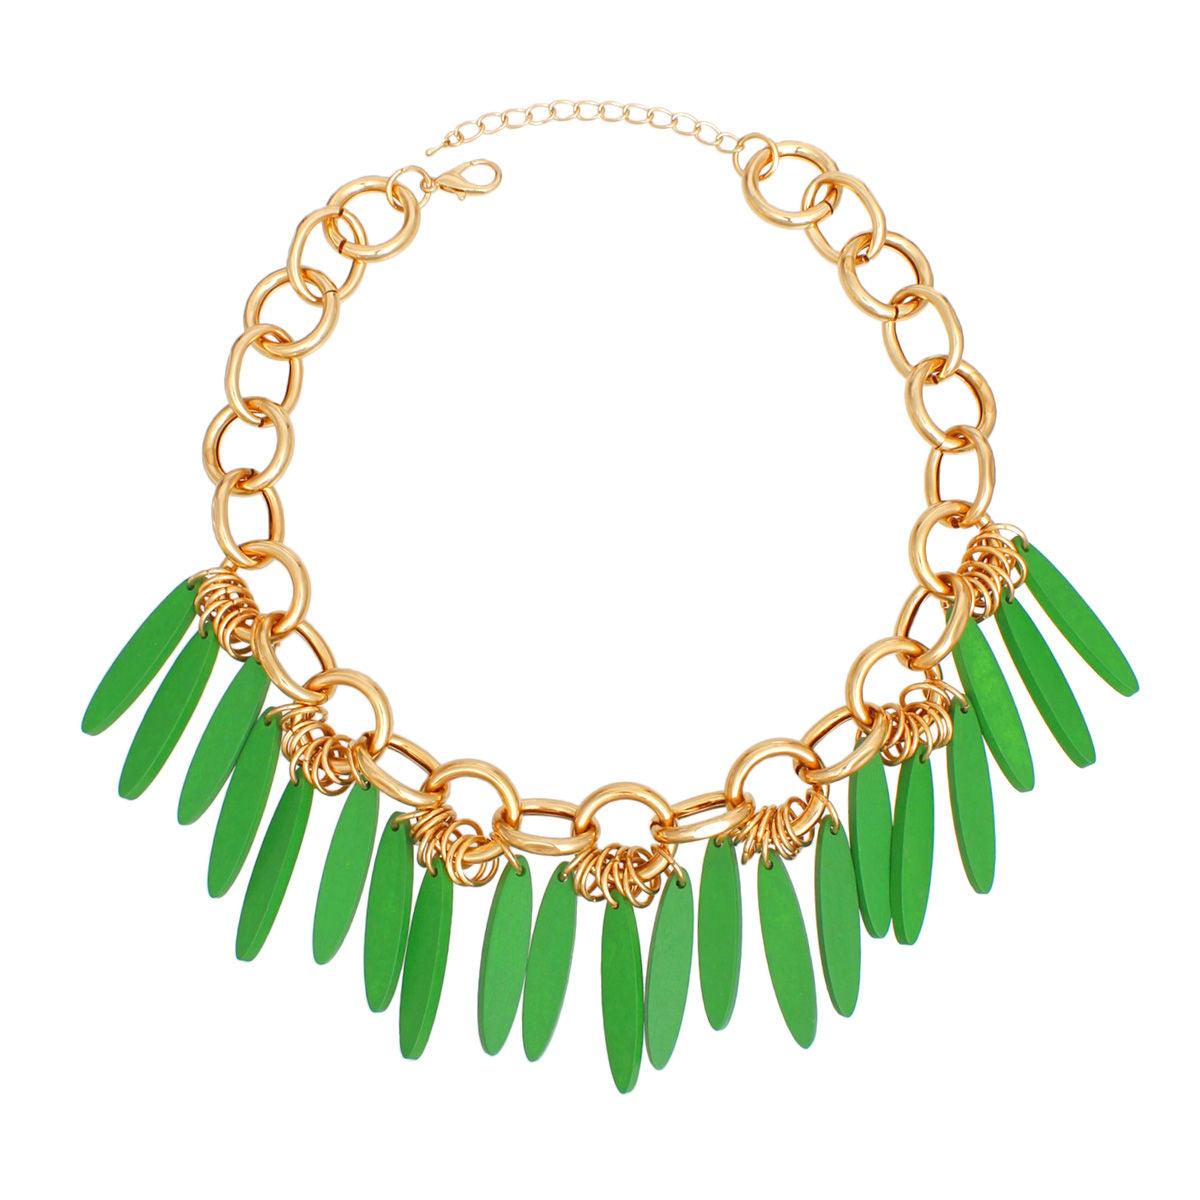 Gold Link Chain Green Drops Detail Statement Necklace - Fashion Jewelry to Shop Now!